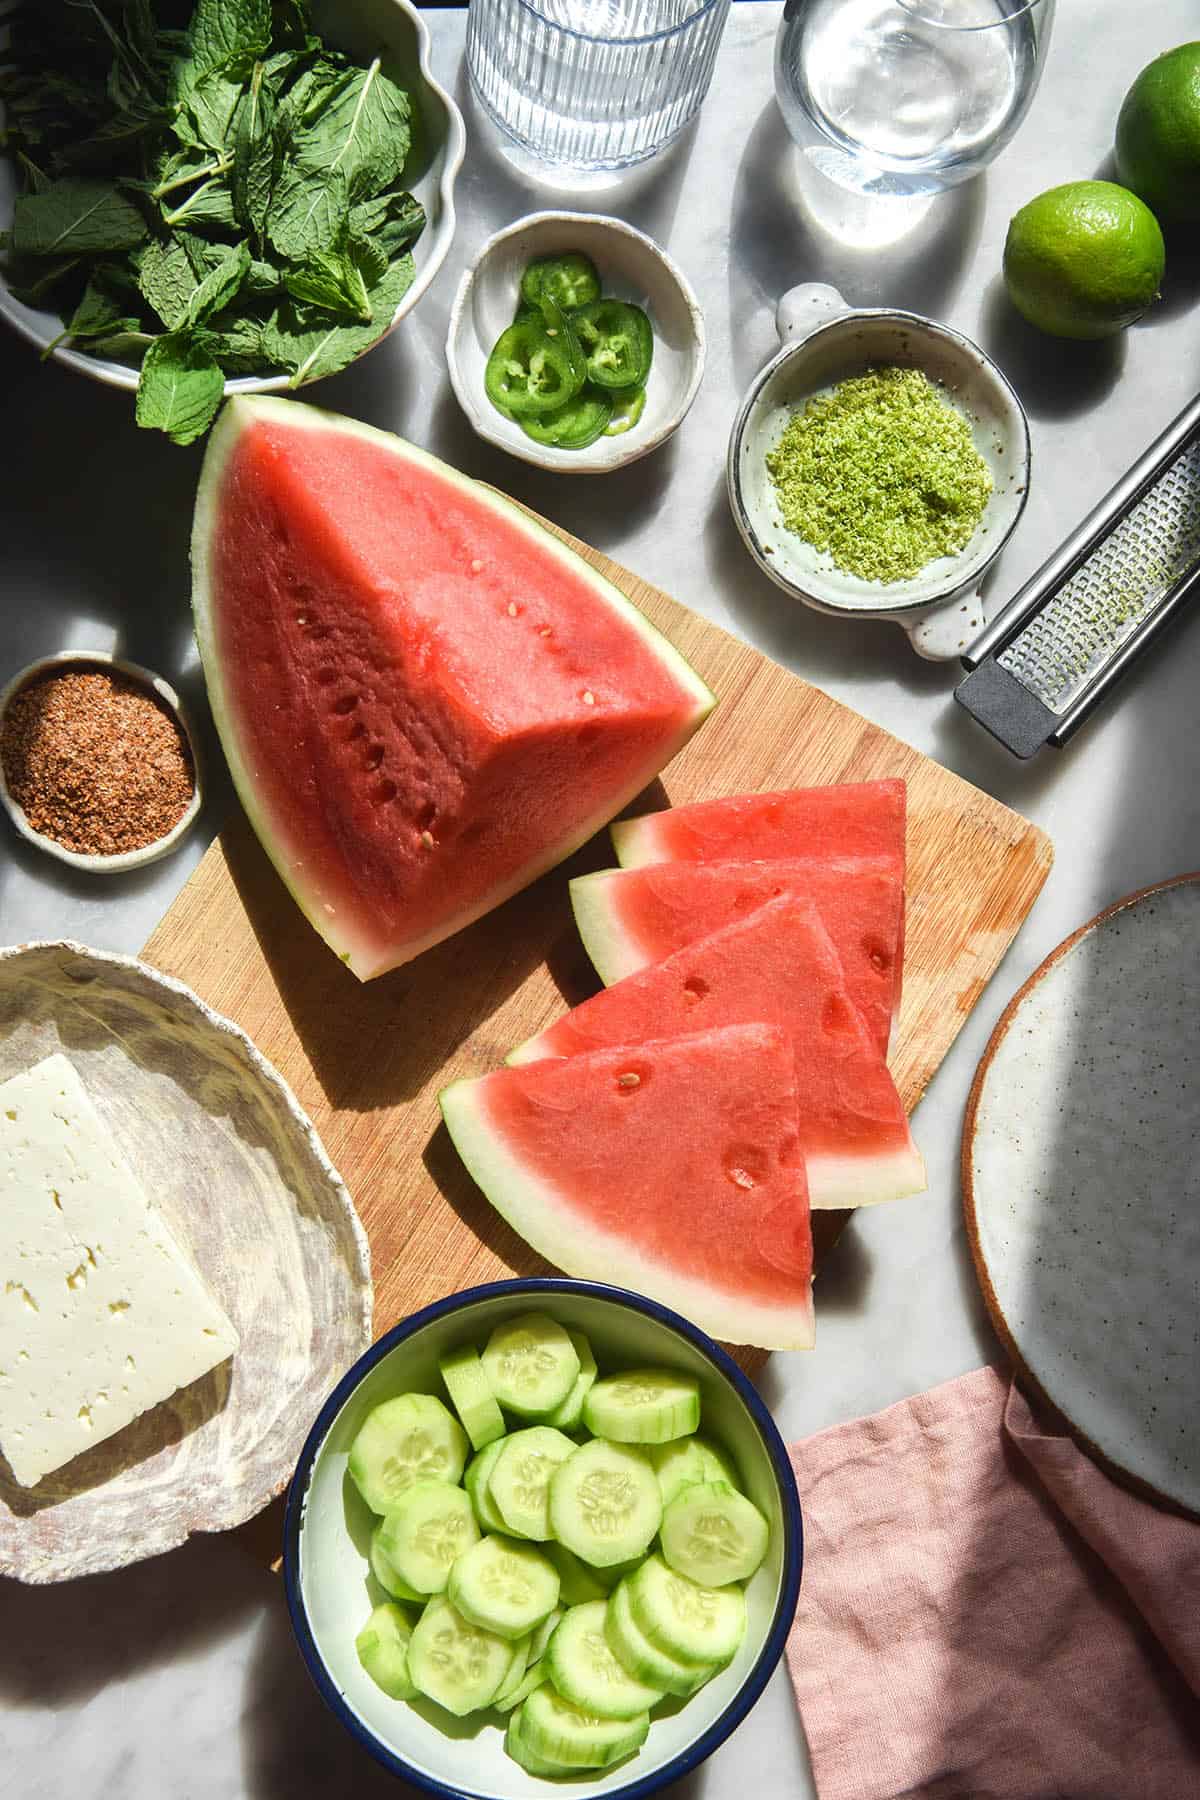 An aerial sunlit image of the ingredients for a watermelon and tajin salad casually arranged on a white marble table. The sliced watermelon sits in the centre, surrounded by cucumber, feta, tajin, mint, jalapeno slices and lime zest.